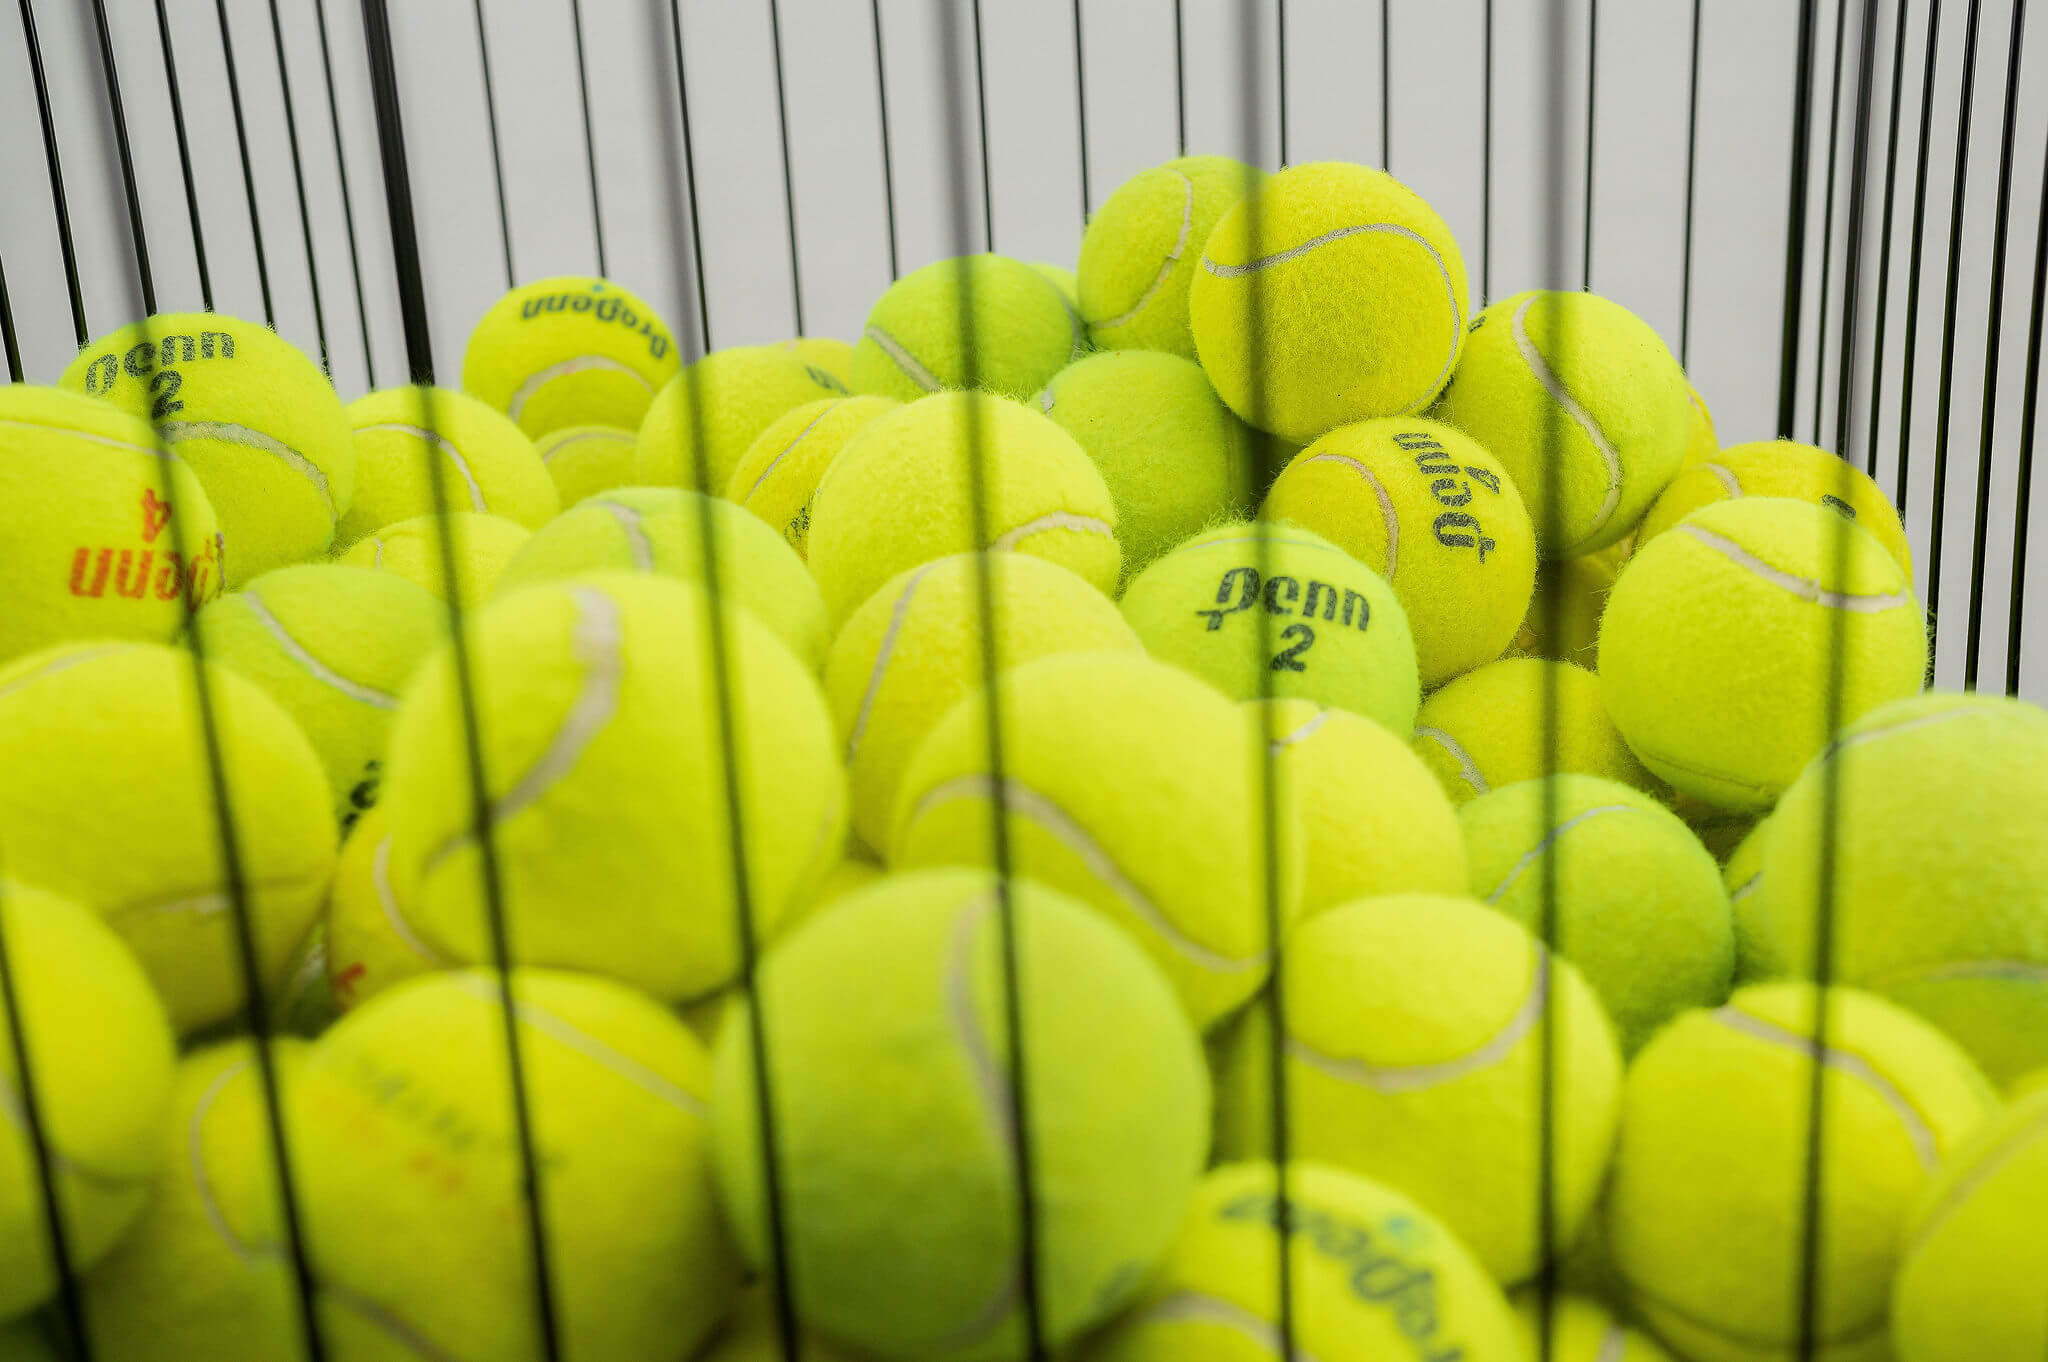 25 Tennis Balls For Dogs